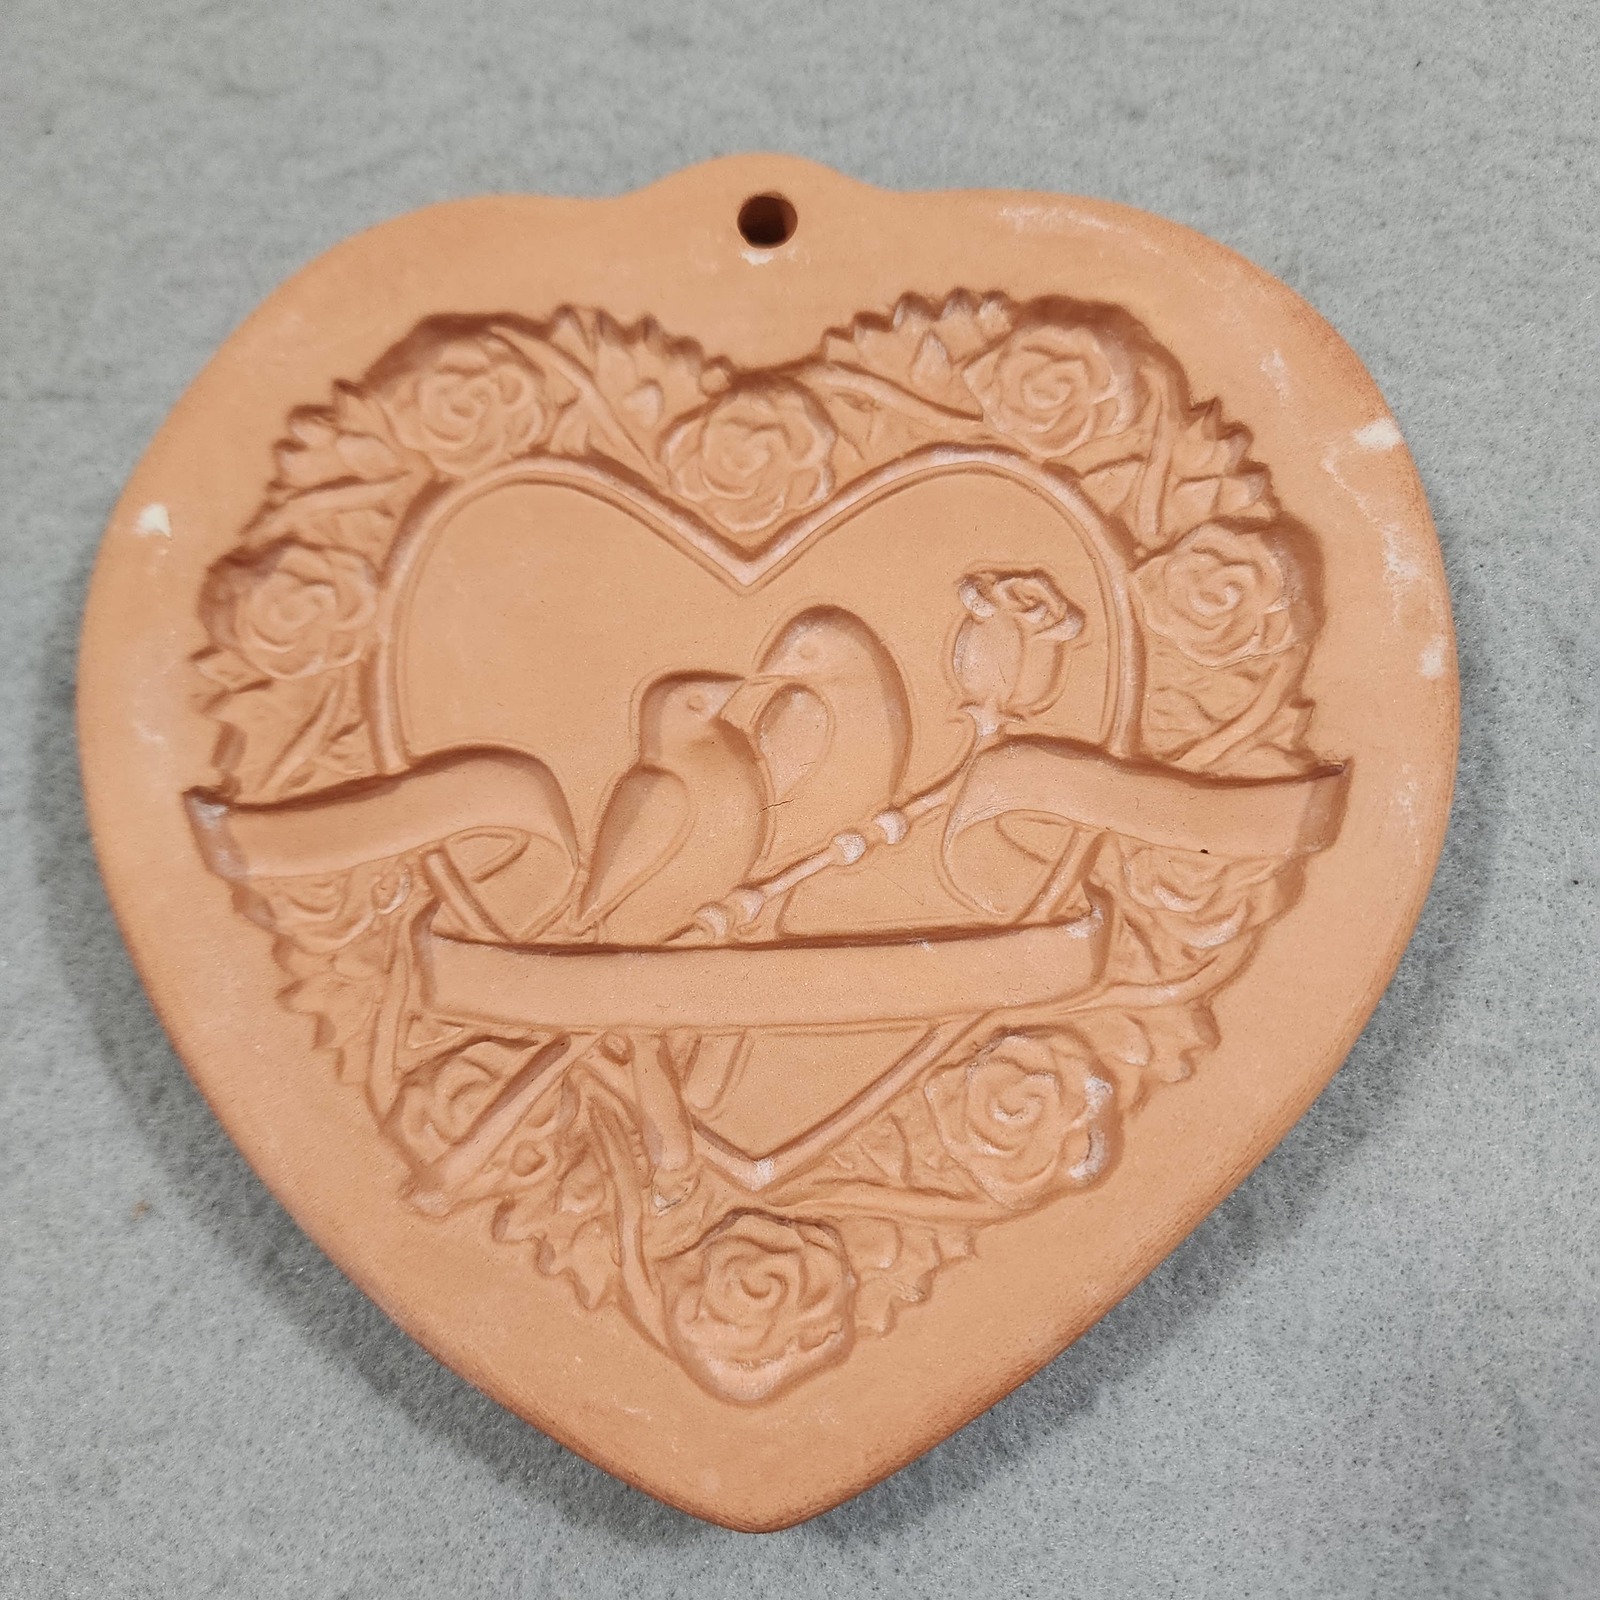 Primary image for Cotton Press HEART & LOVEBIRDS Cookie Press Mold Paper Casting 1992 Vintage